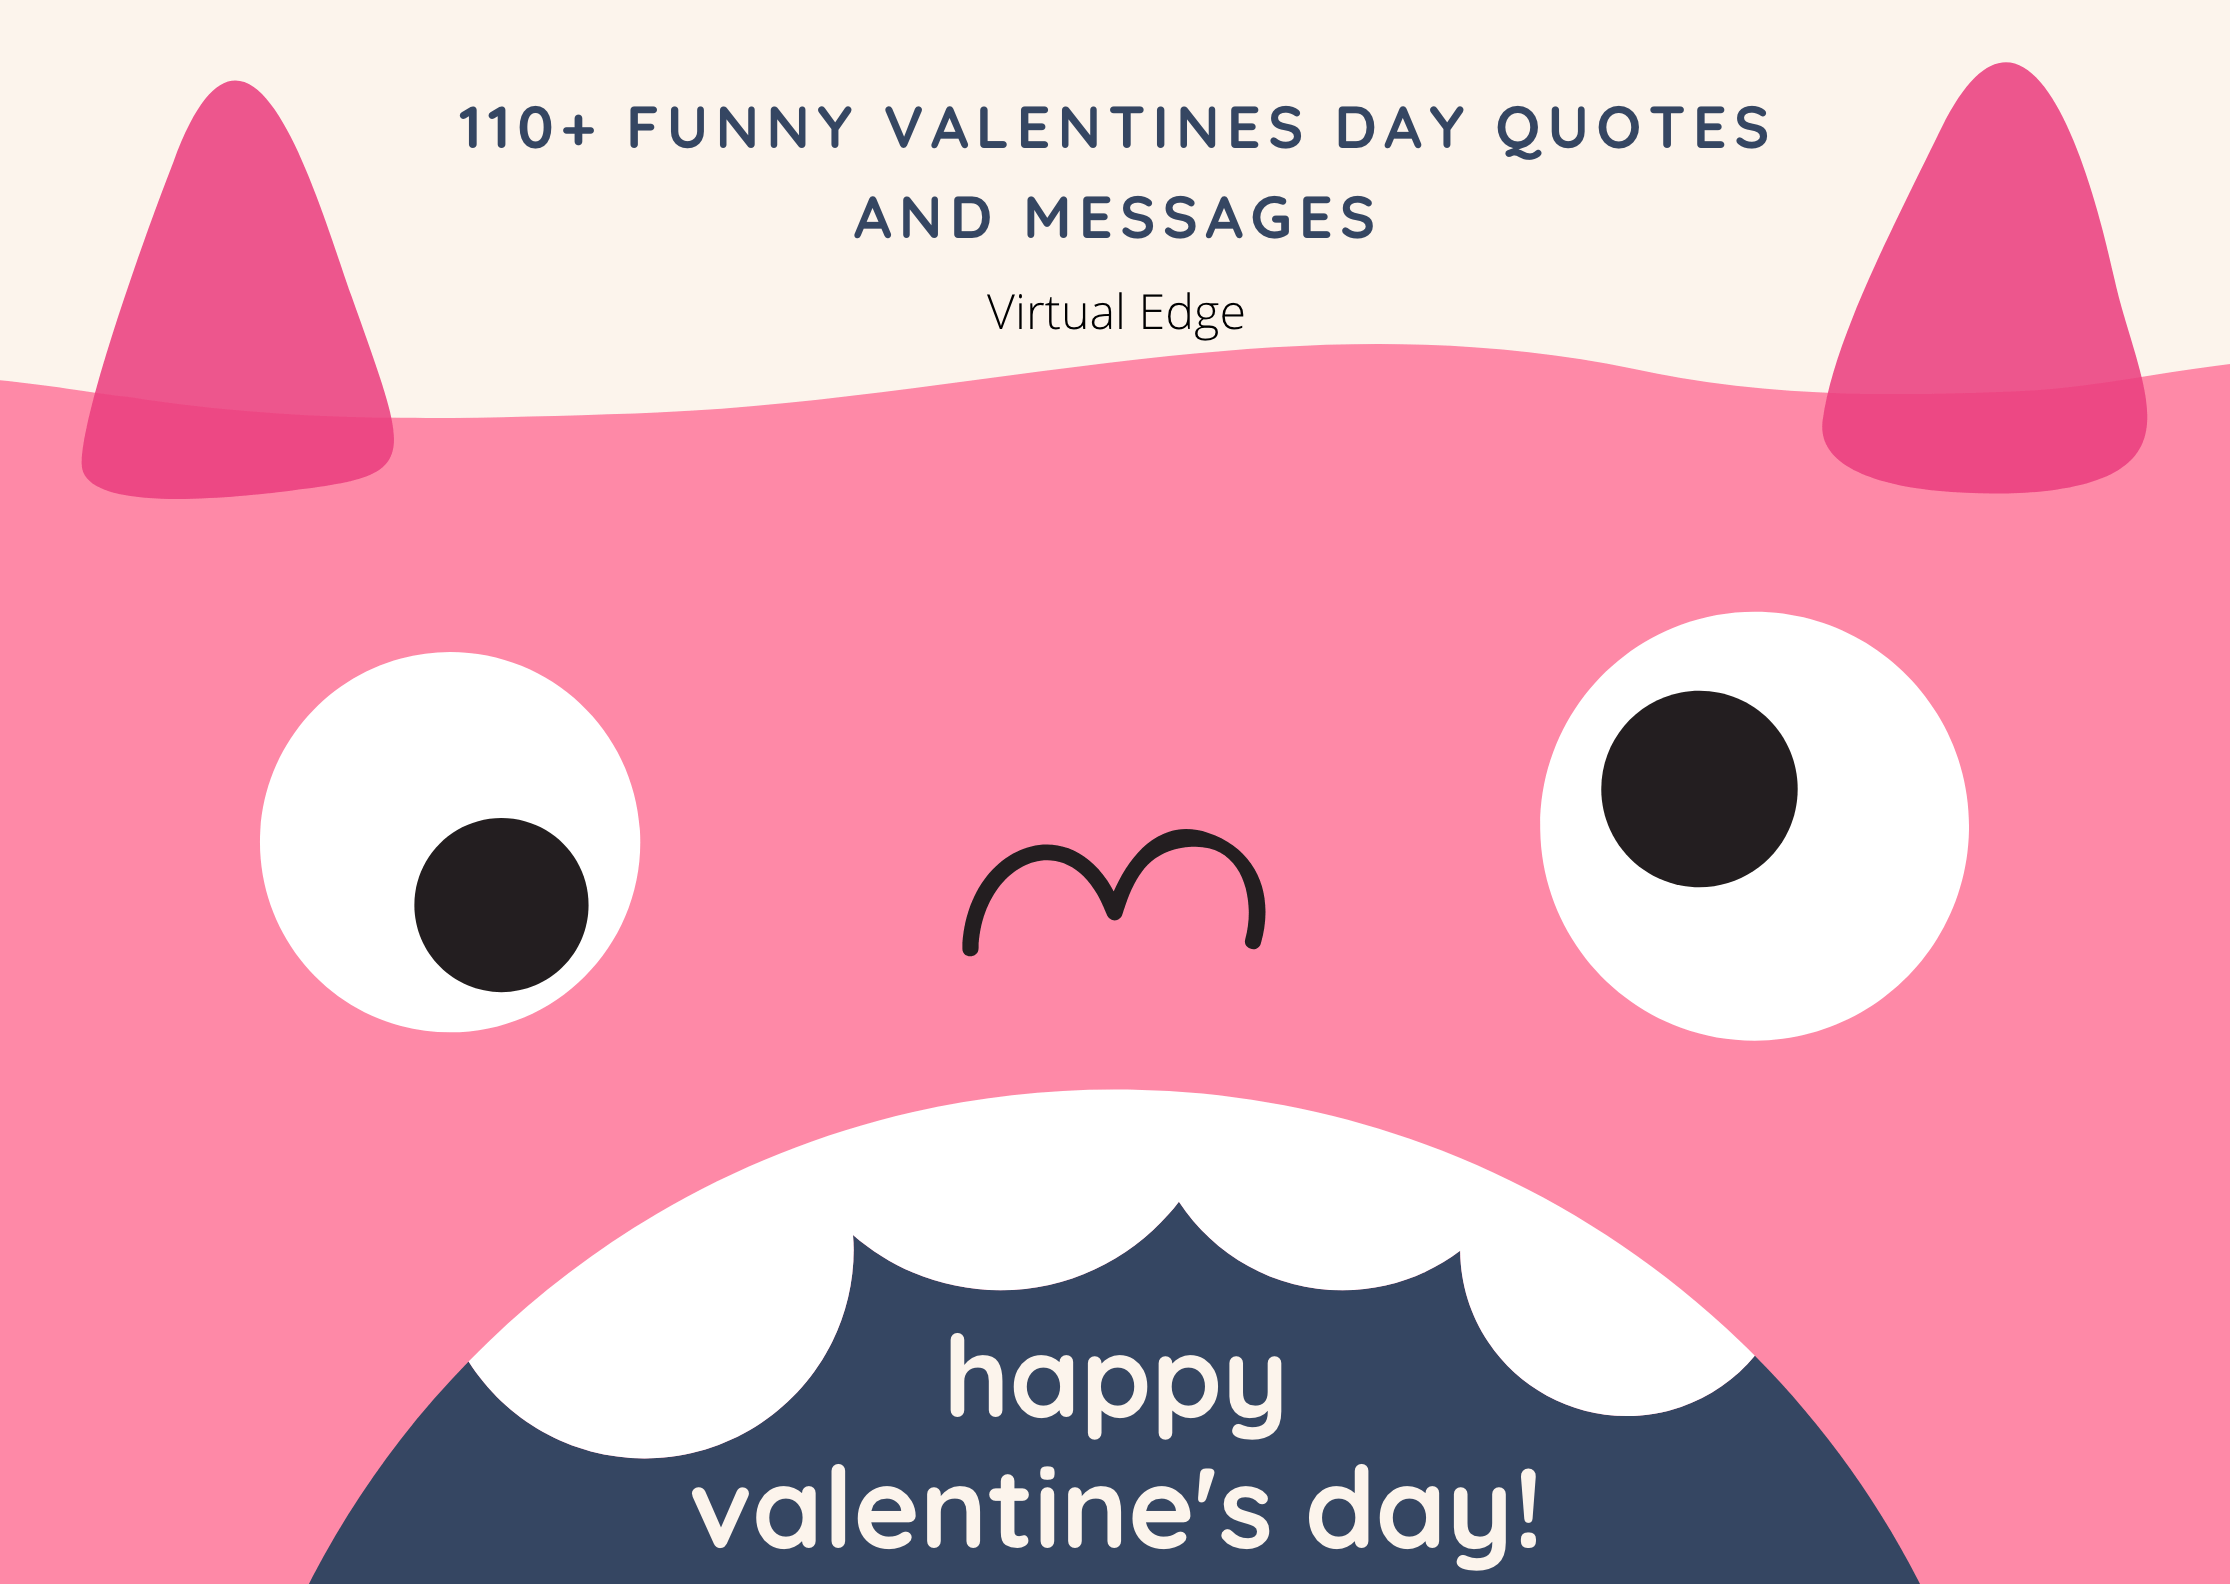 110+ Funny Valentines Day Quotes and Messages